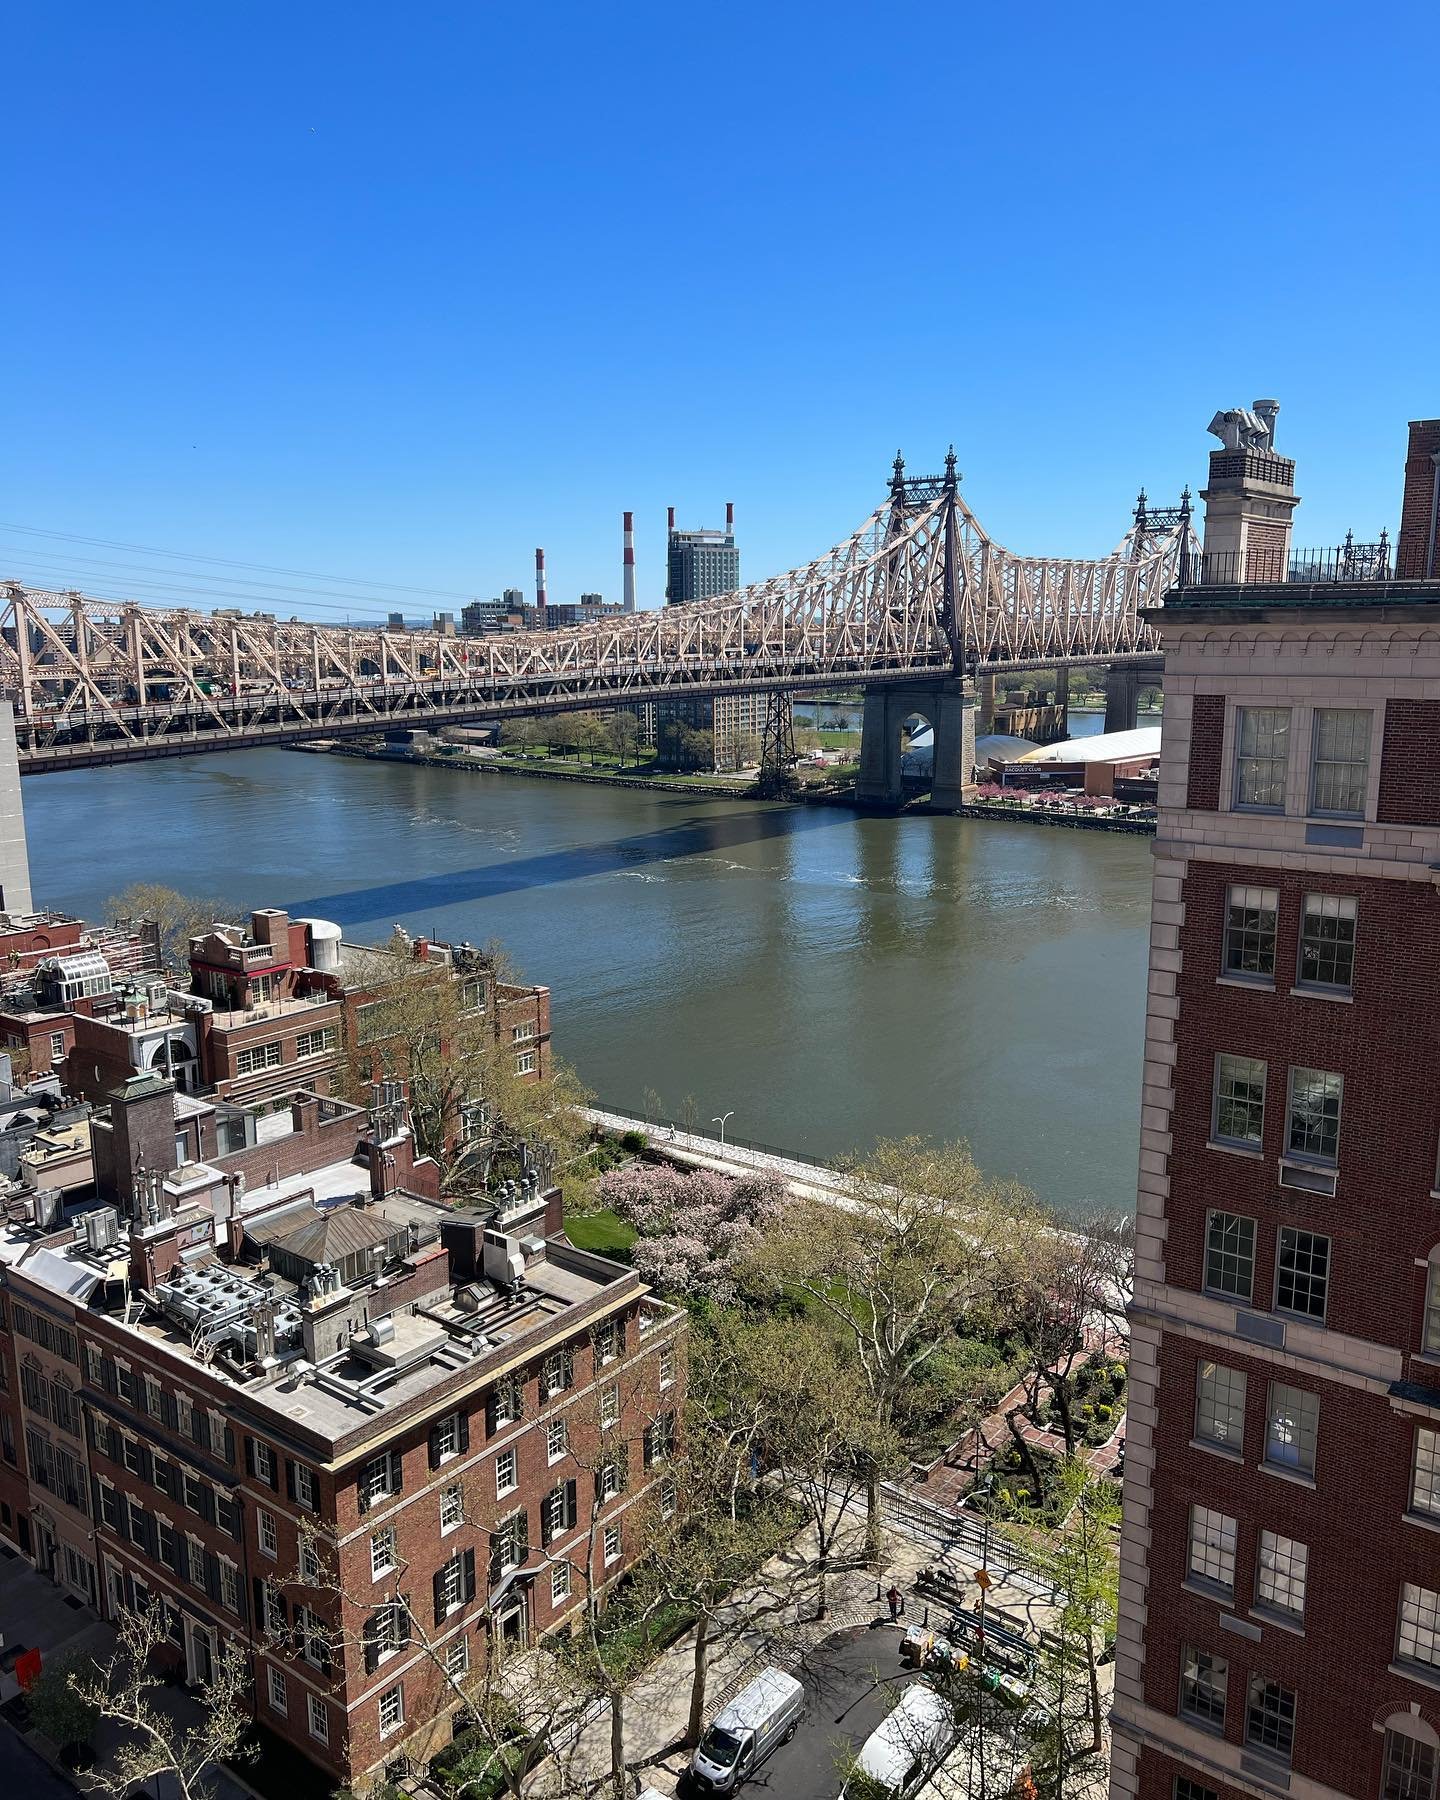 This view of the East River from our Sutton Place project never gets old! We have been lucky enough to work with this family for years on various homes in CT, Long Island, FL and this one in NYC. We love what we get to do each day!
.
.
.
#eastriver #